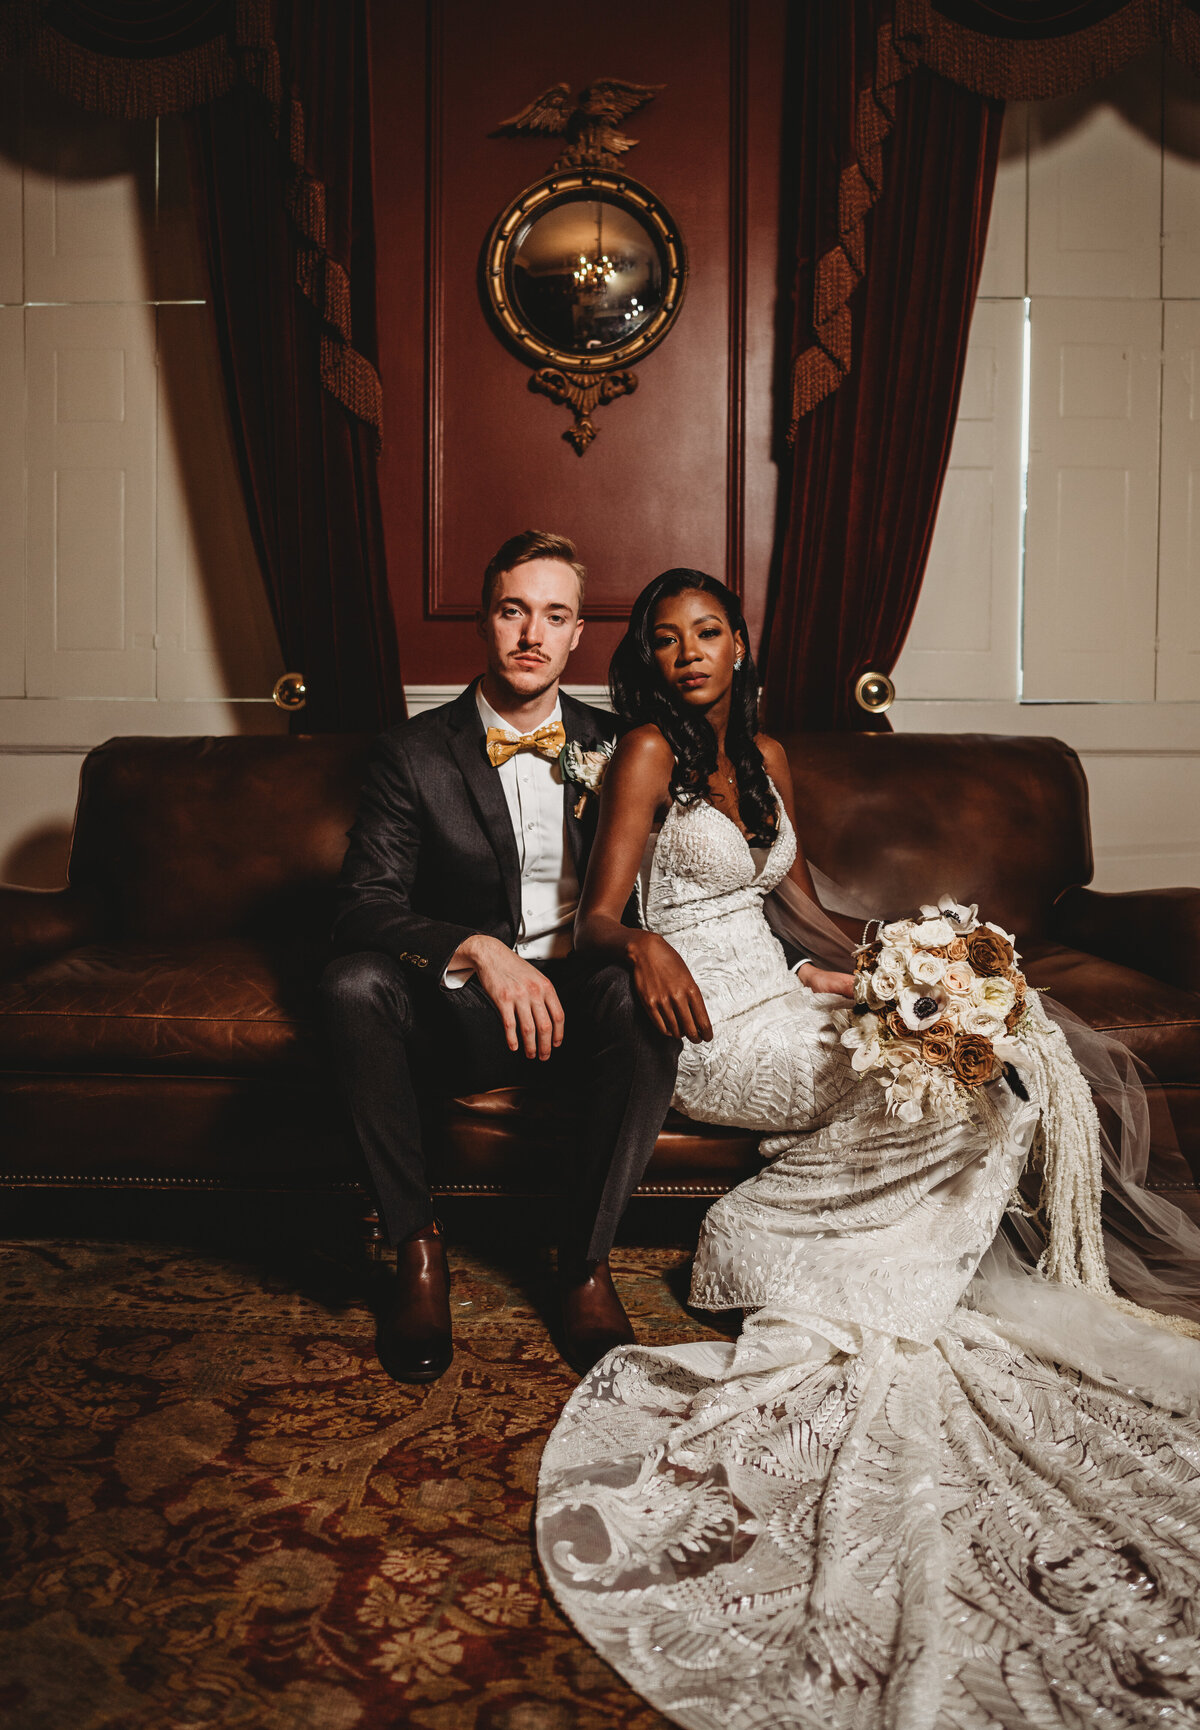 Bride and groom sitting in a lounge together on a leather couch for indoor wedding photography with Maryland wedding photographer